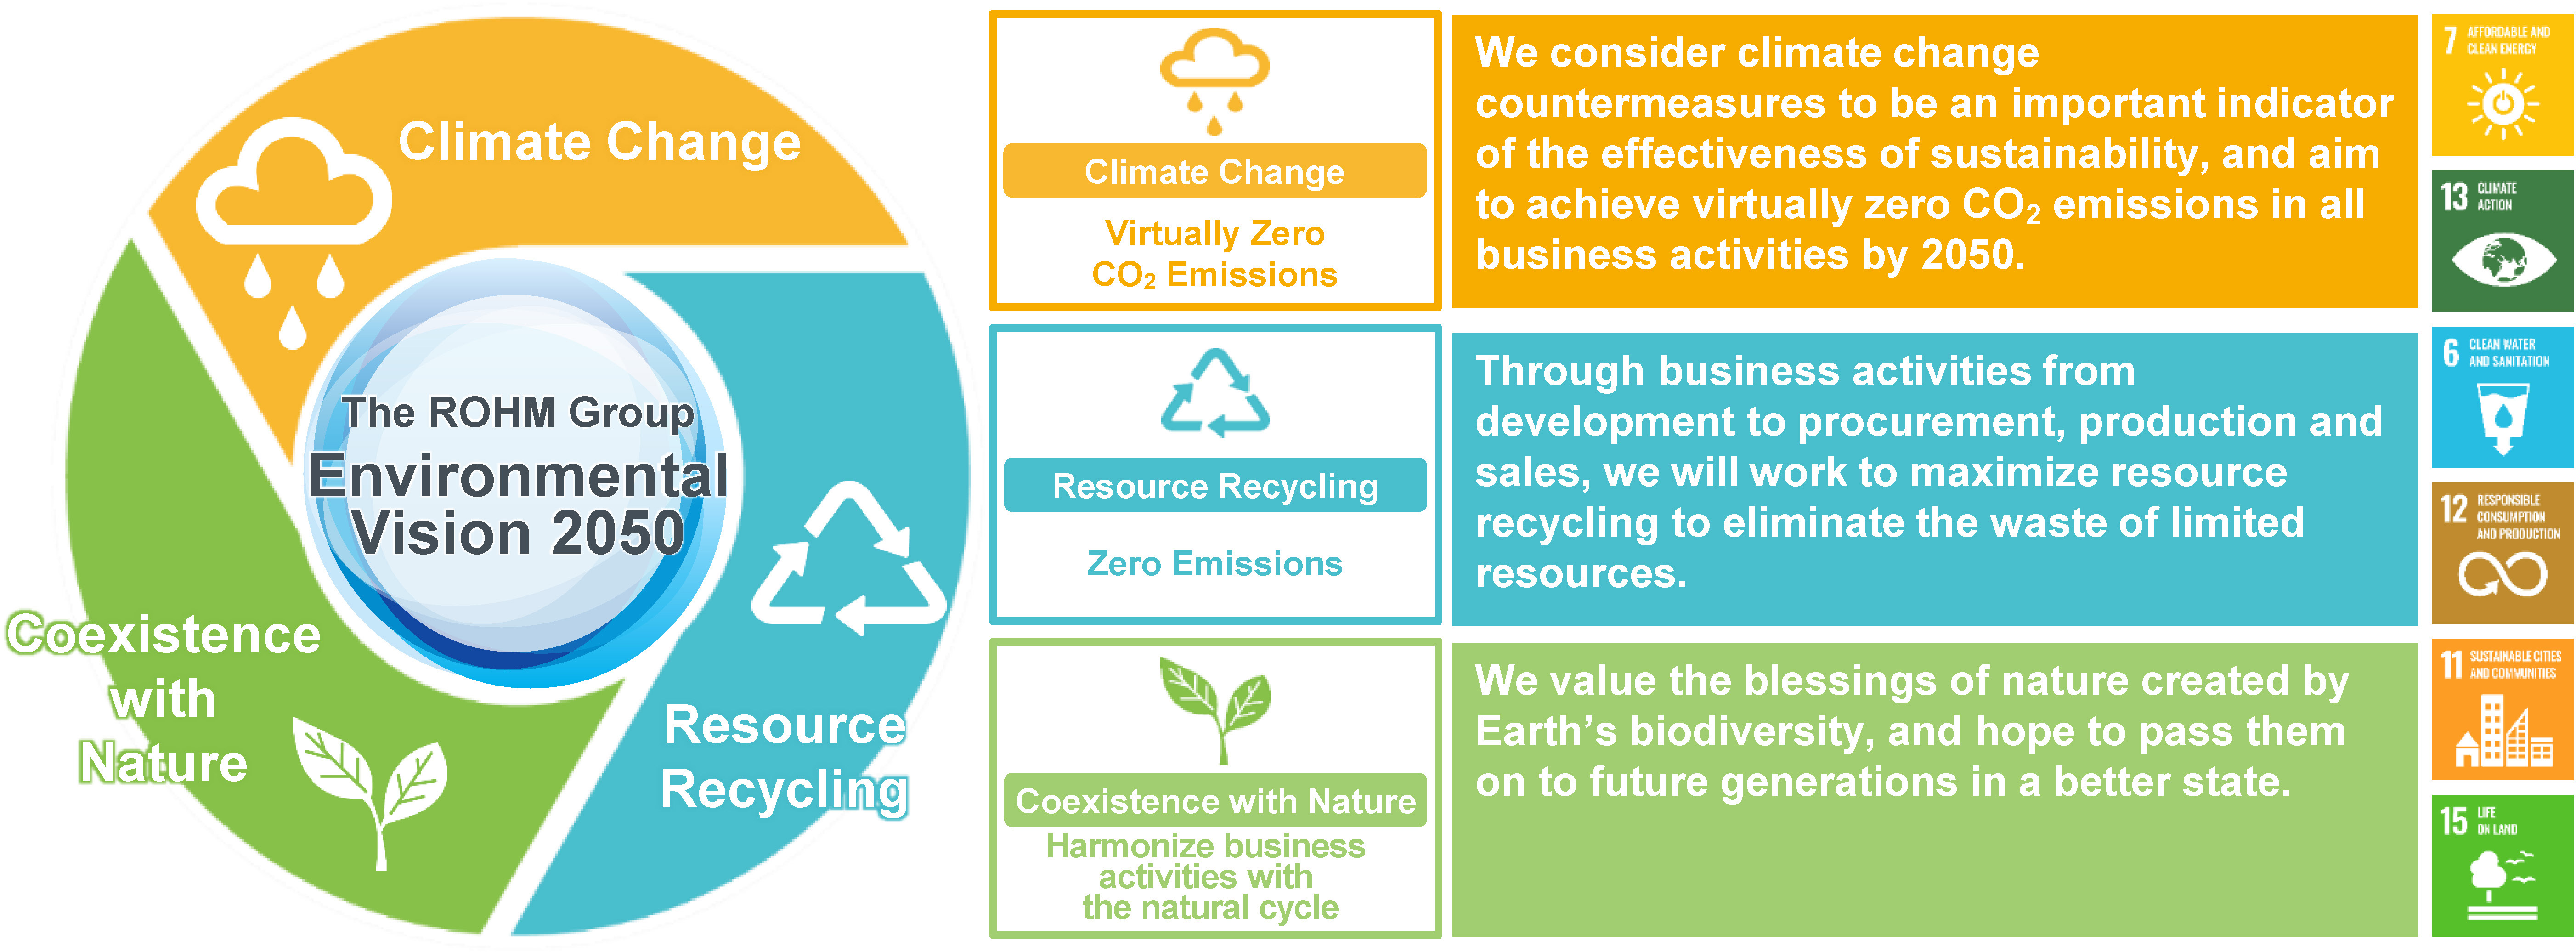 ROHM will promote business activities in harmony with the natural cycle to protect biodiversity based on the three themes of climate change, resource recycling, and co-existence with nature.